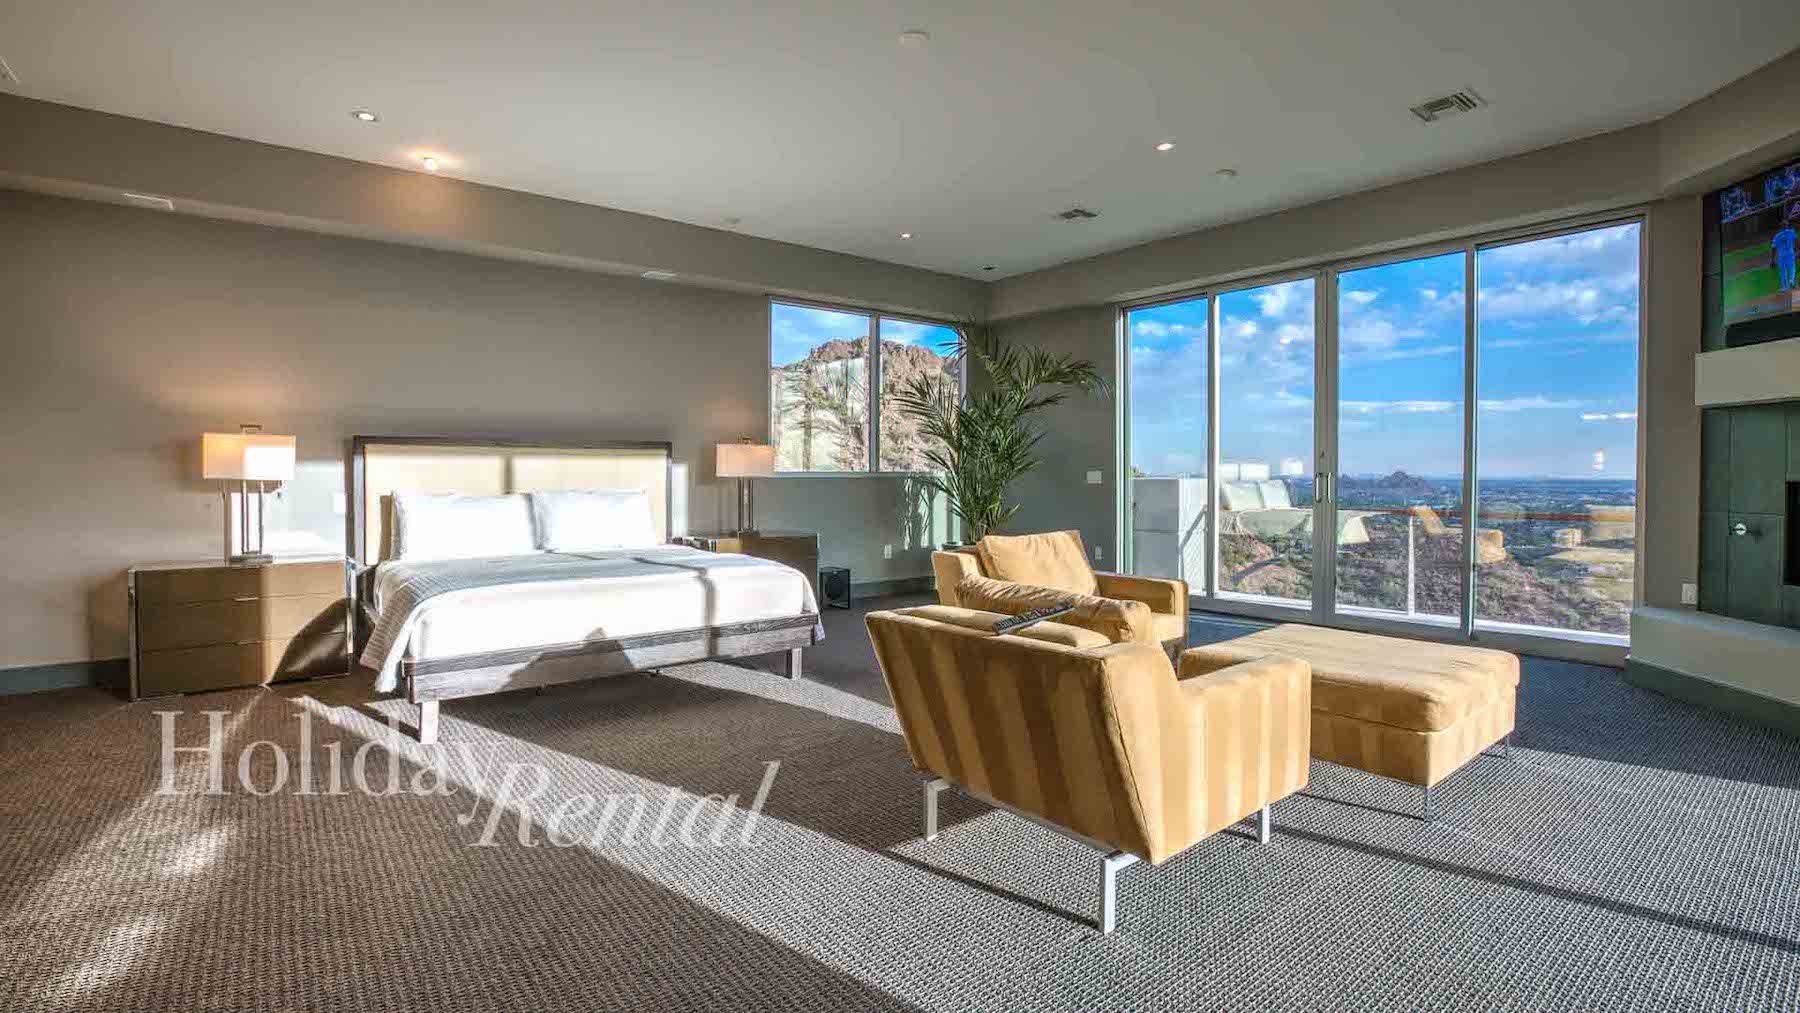 luxury bedroom with window views vacation rental on camelback mountain